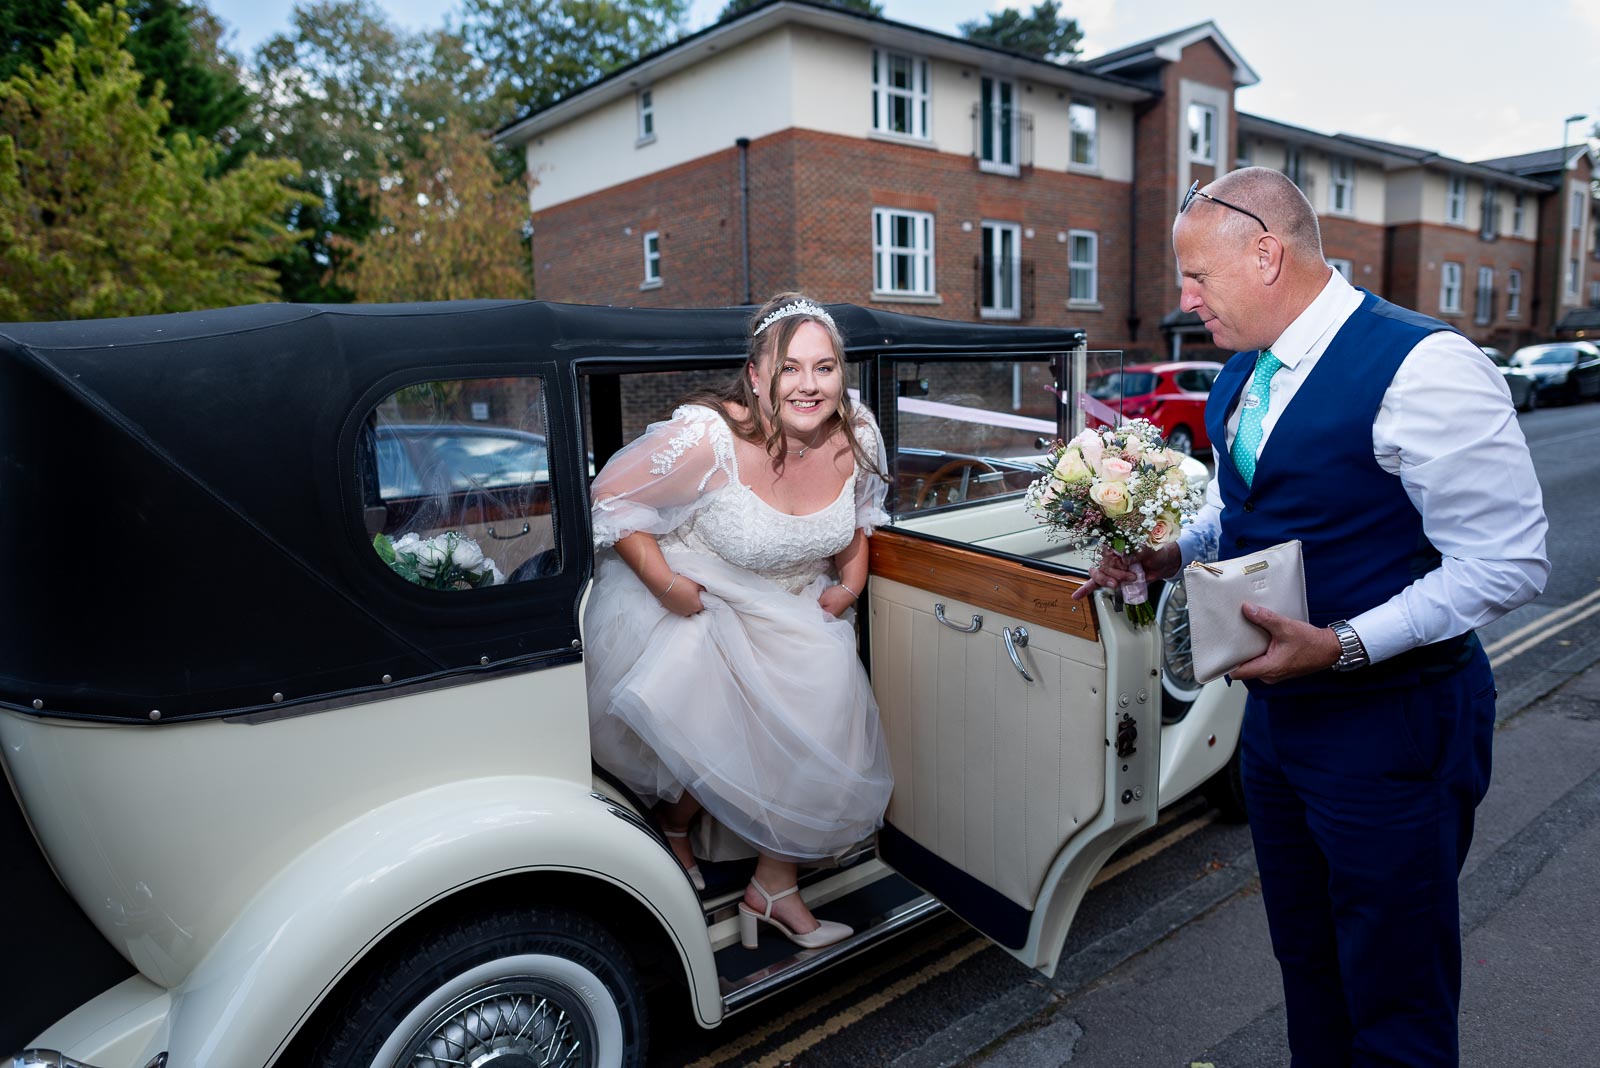 Catherine arrives at Haywards Heath Town Hall to get married to Steve